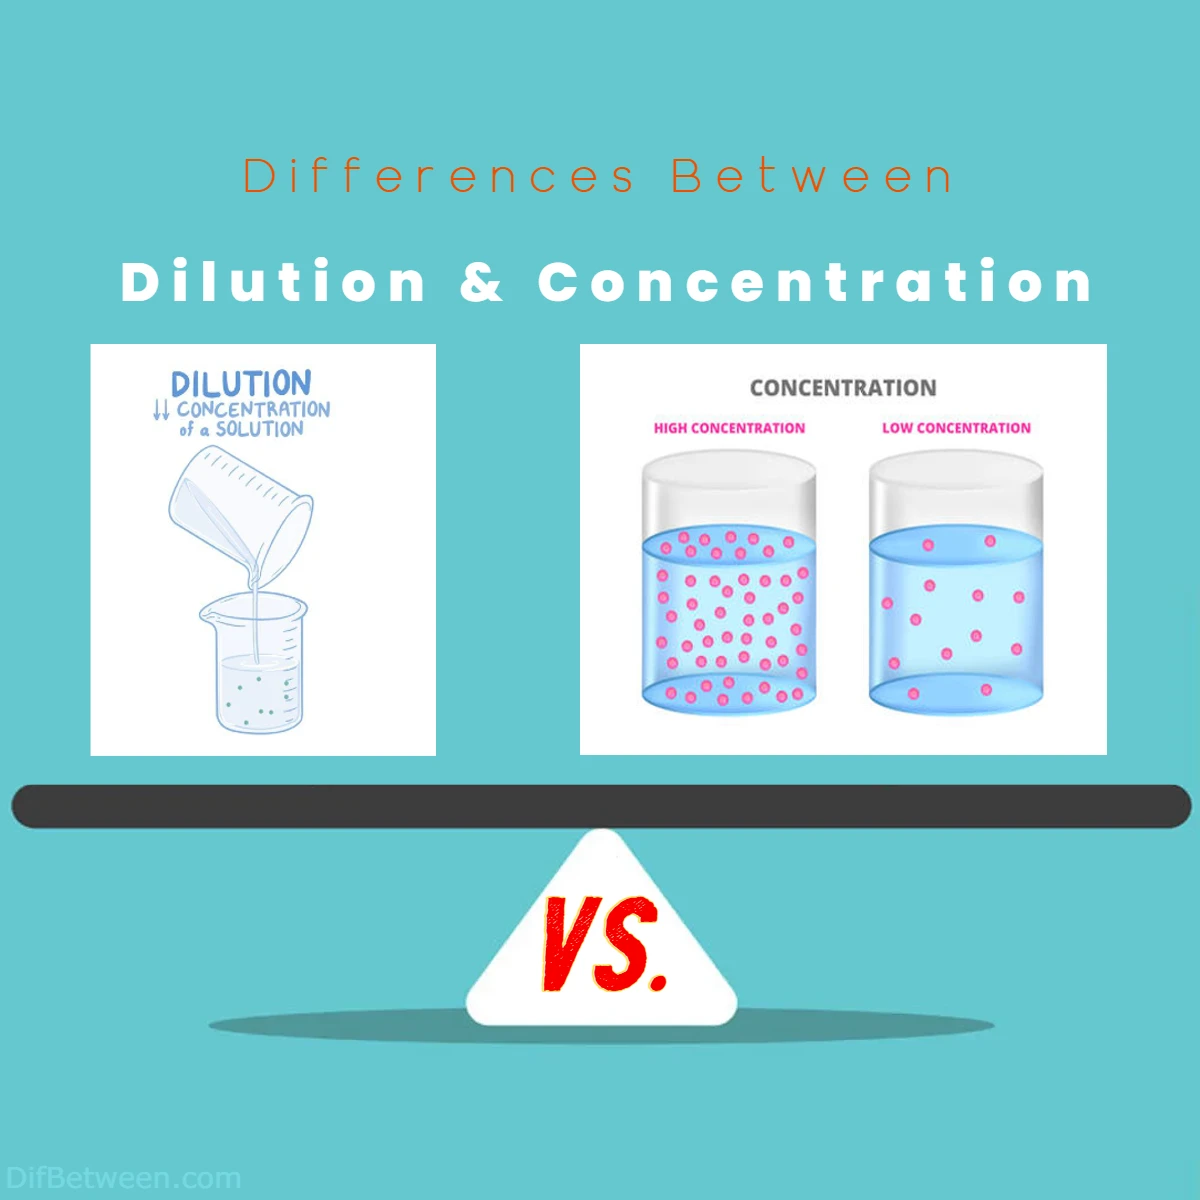 Differences Between Dilution vs Concentration